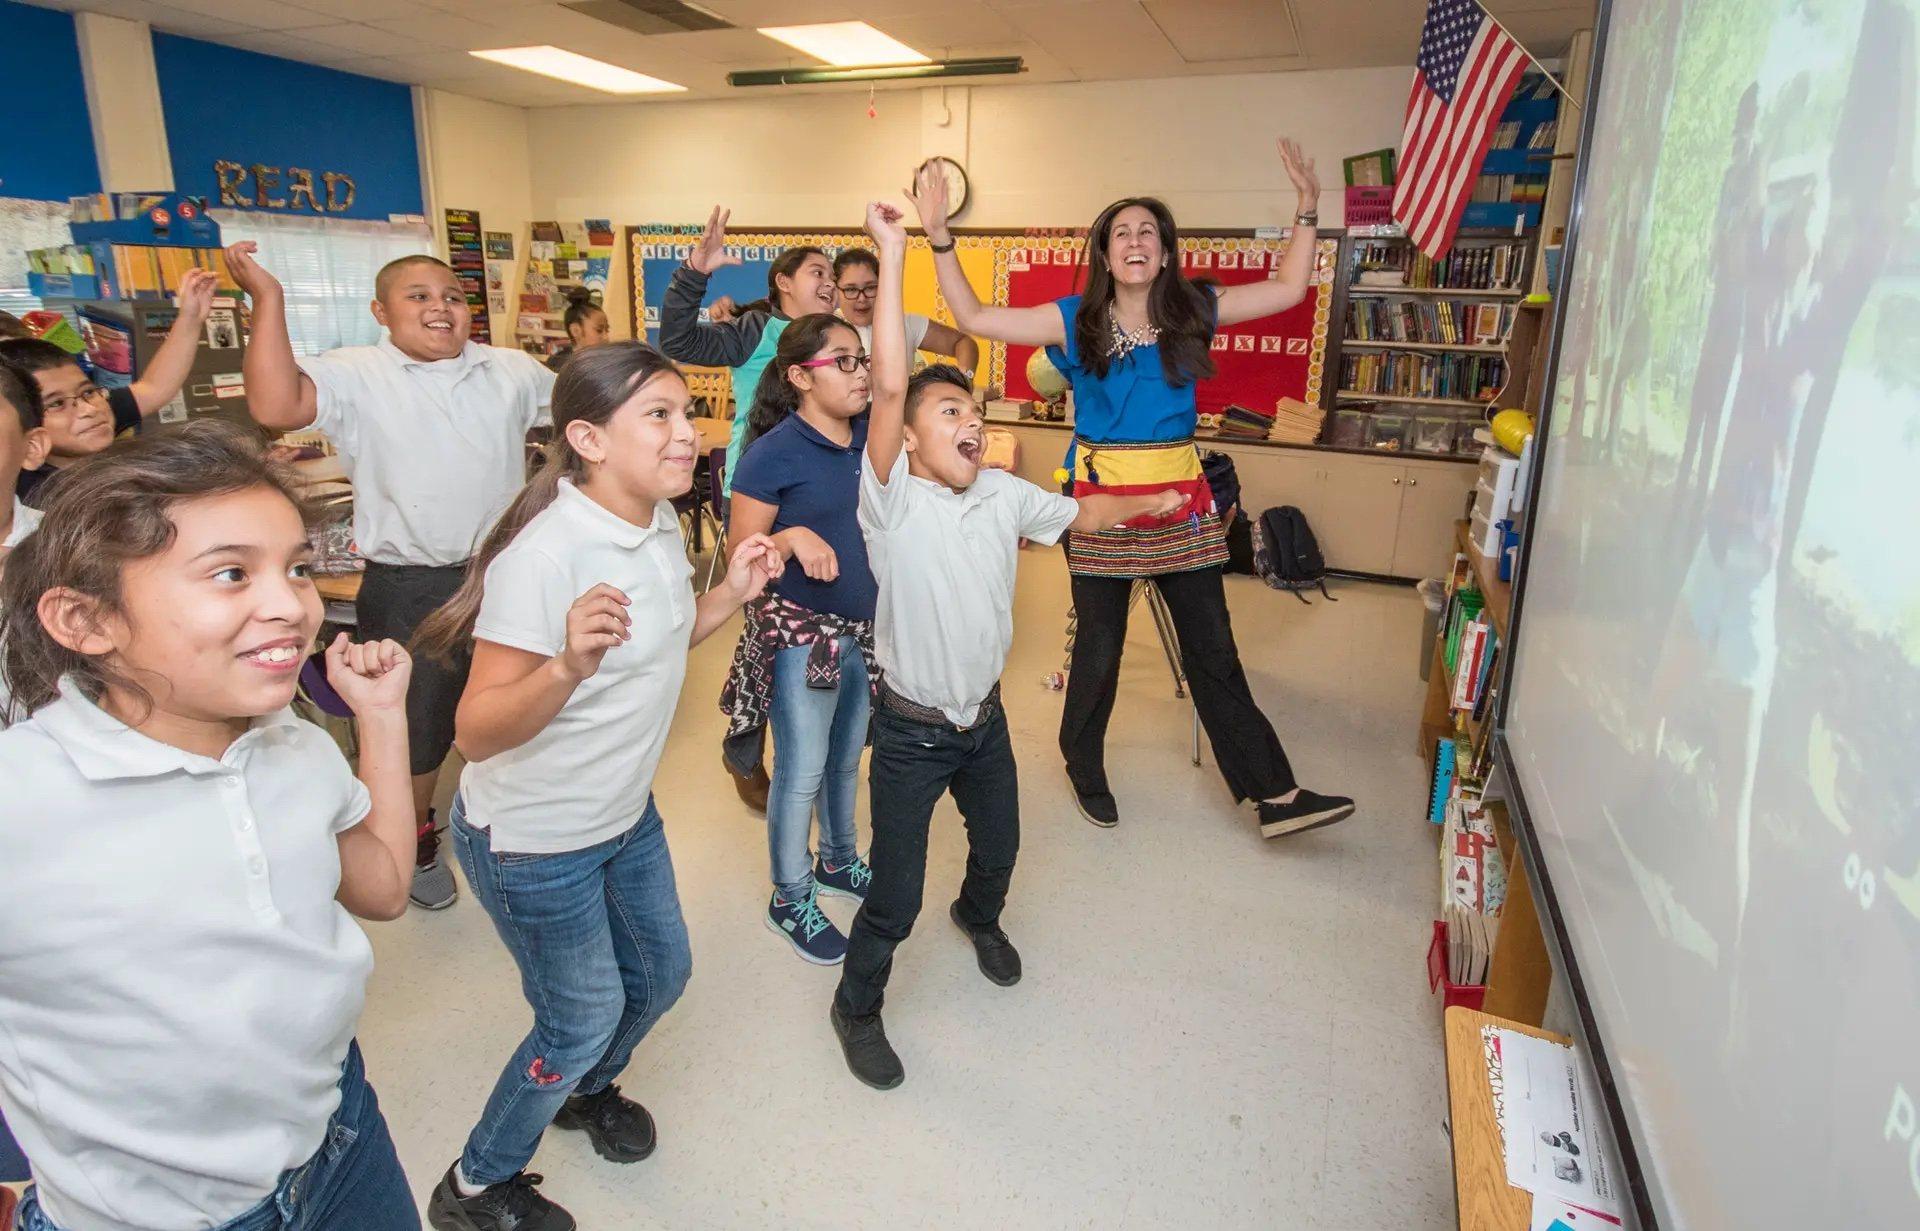 A DFW teacher dances with her students in the classroom